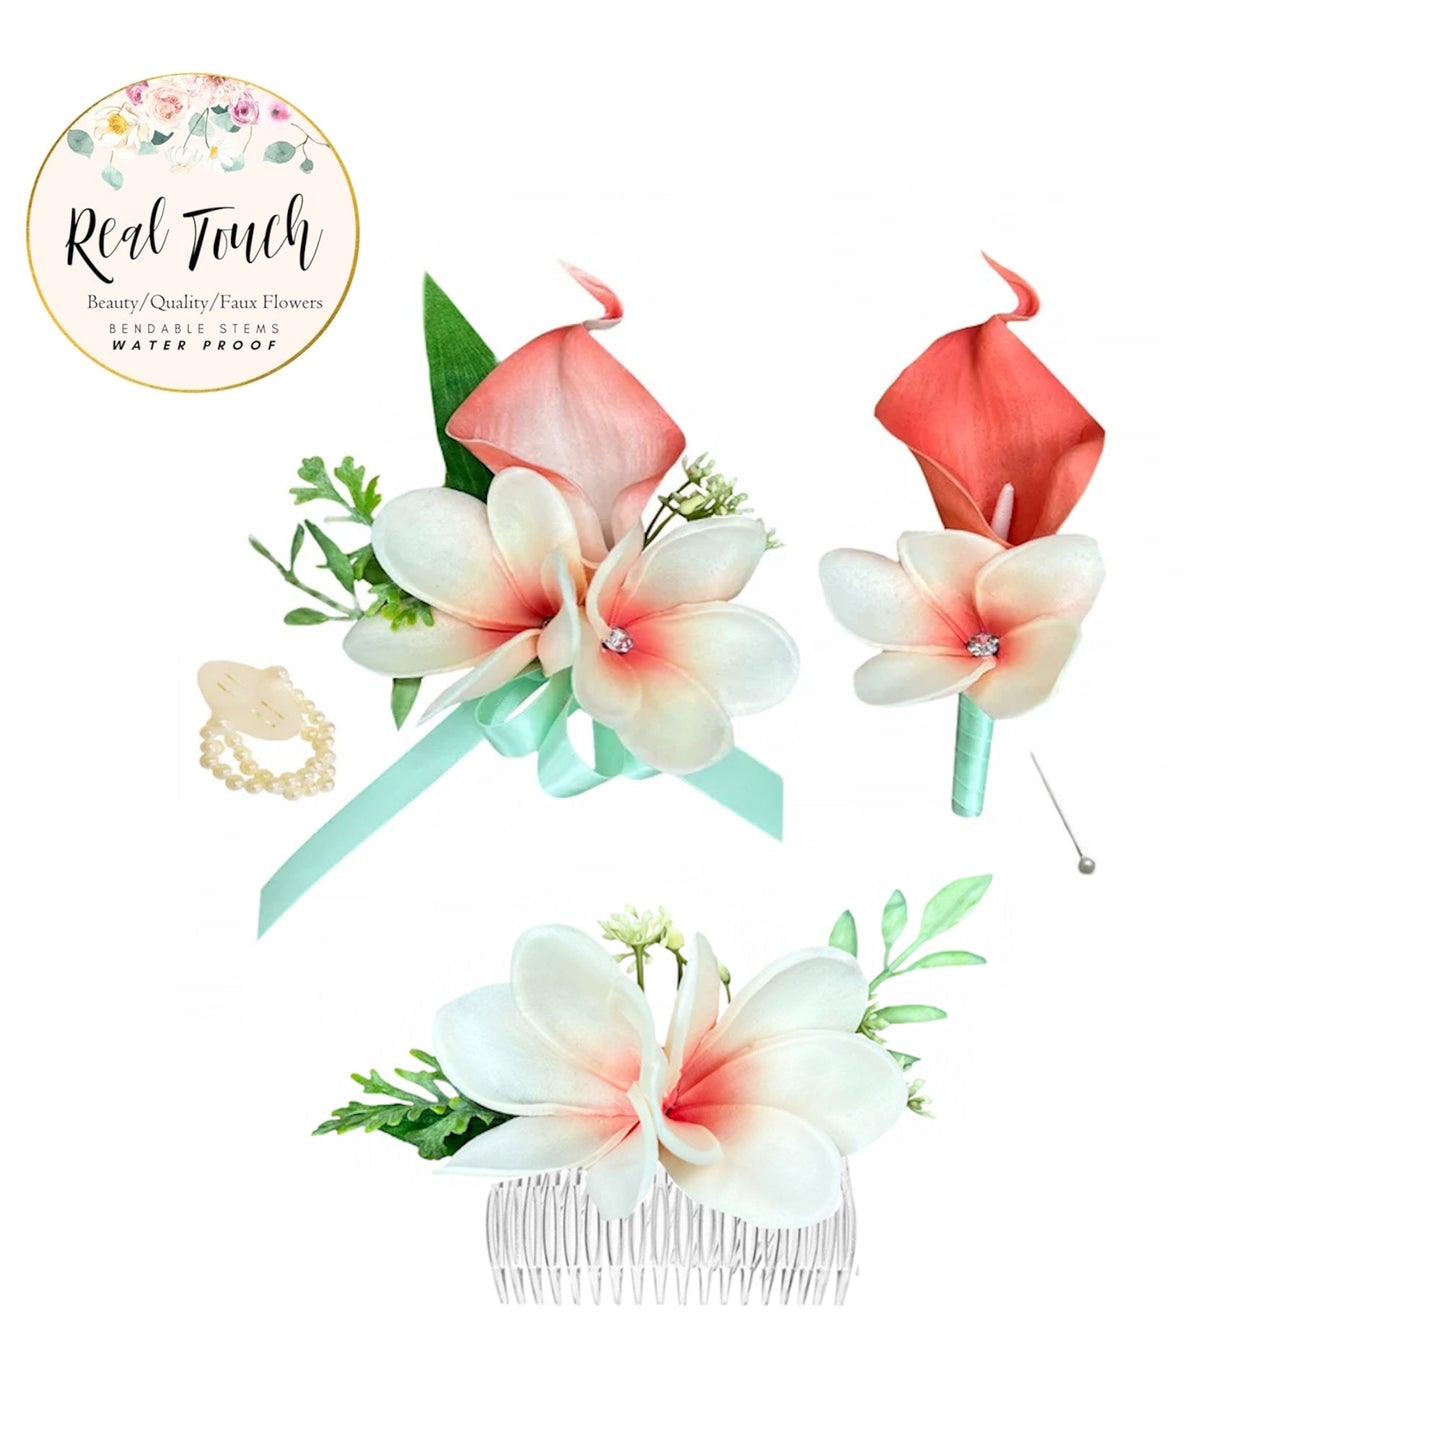 Luxurious Coral Calla Lily & Plumeria Silk Flower Ensemble - Includes Corsage, Boutonniere, and Hair Accessory